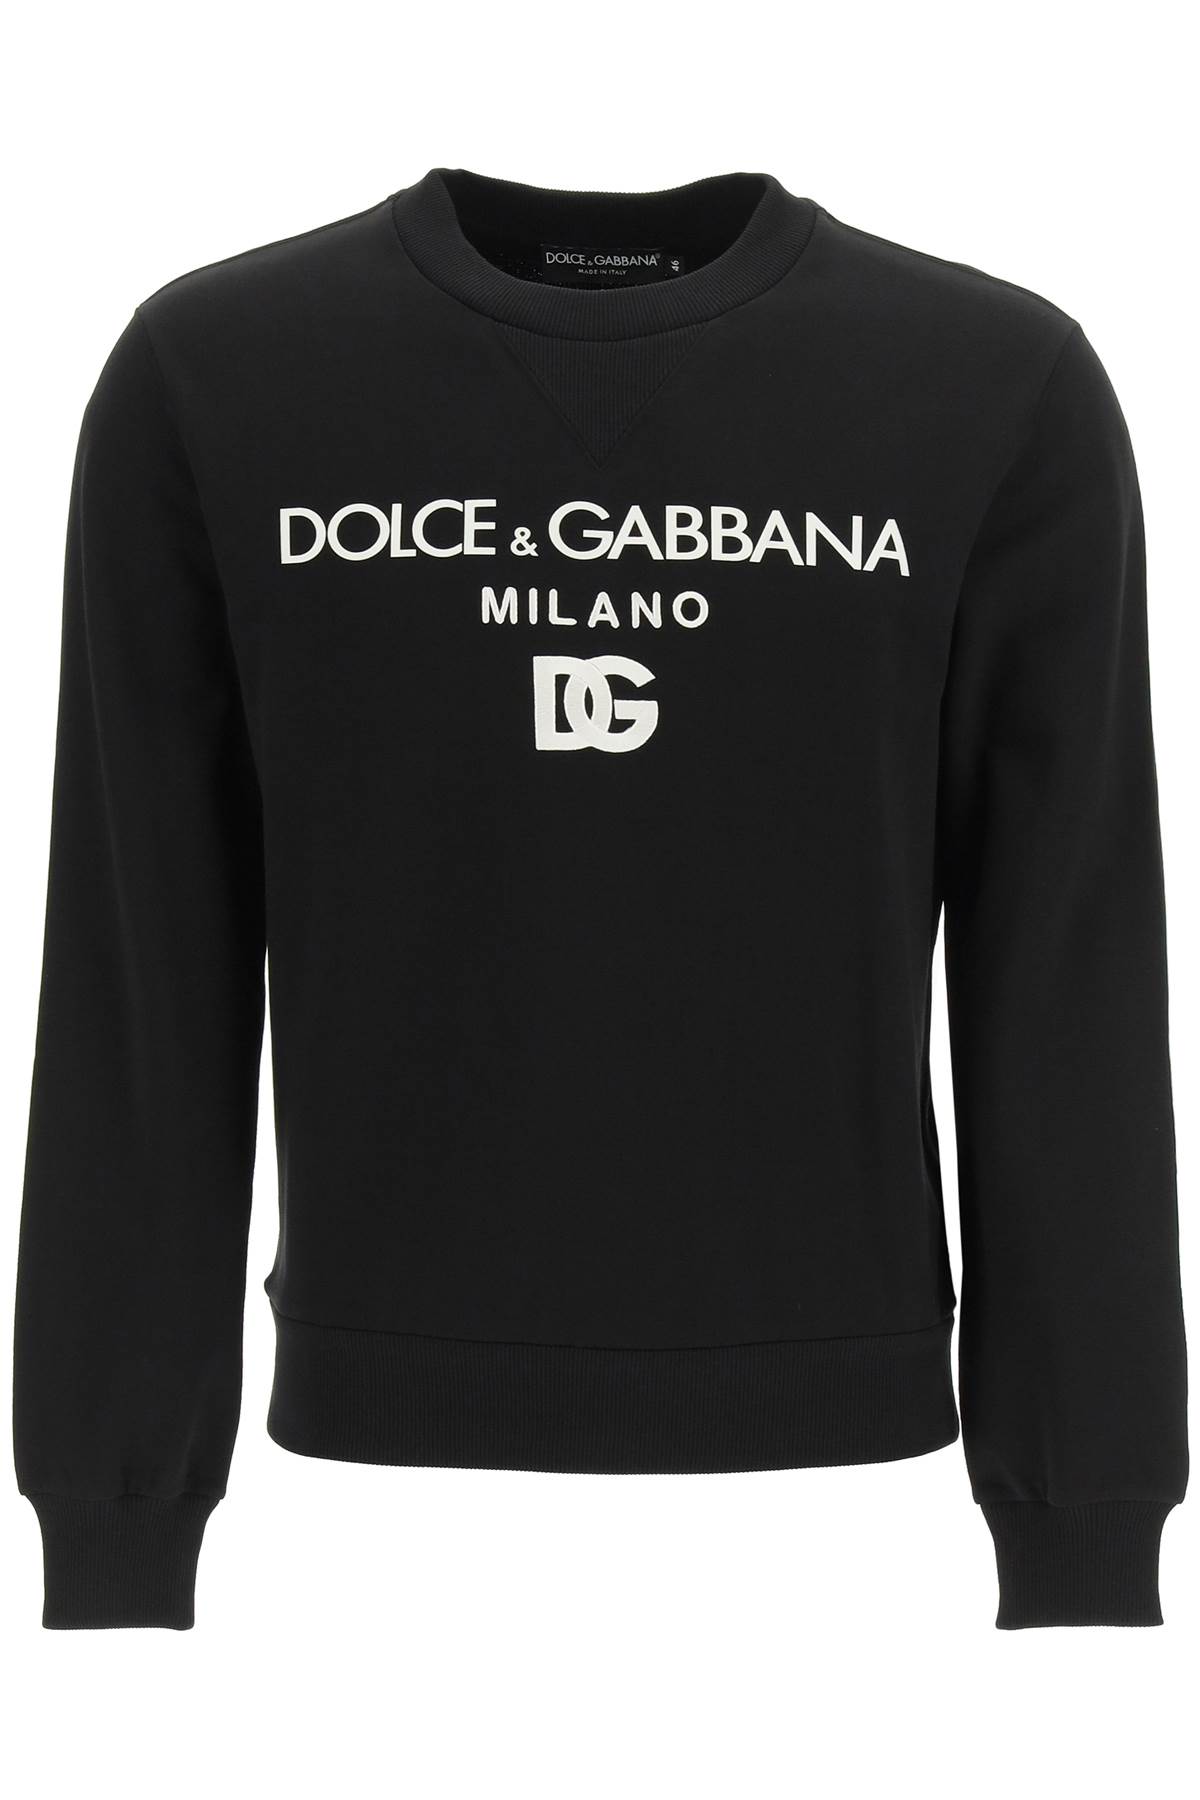 Dolce & Gabbana Crew Neck Sweatshirt With Dg Print And Embroidery